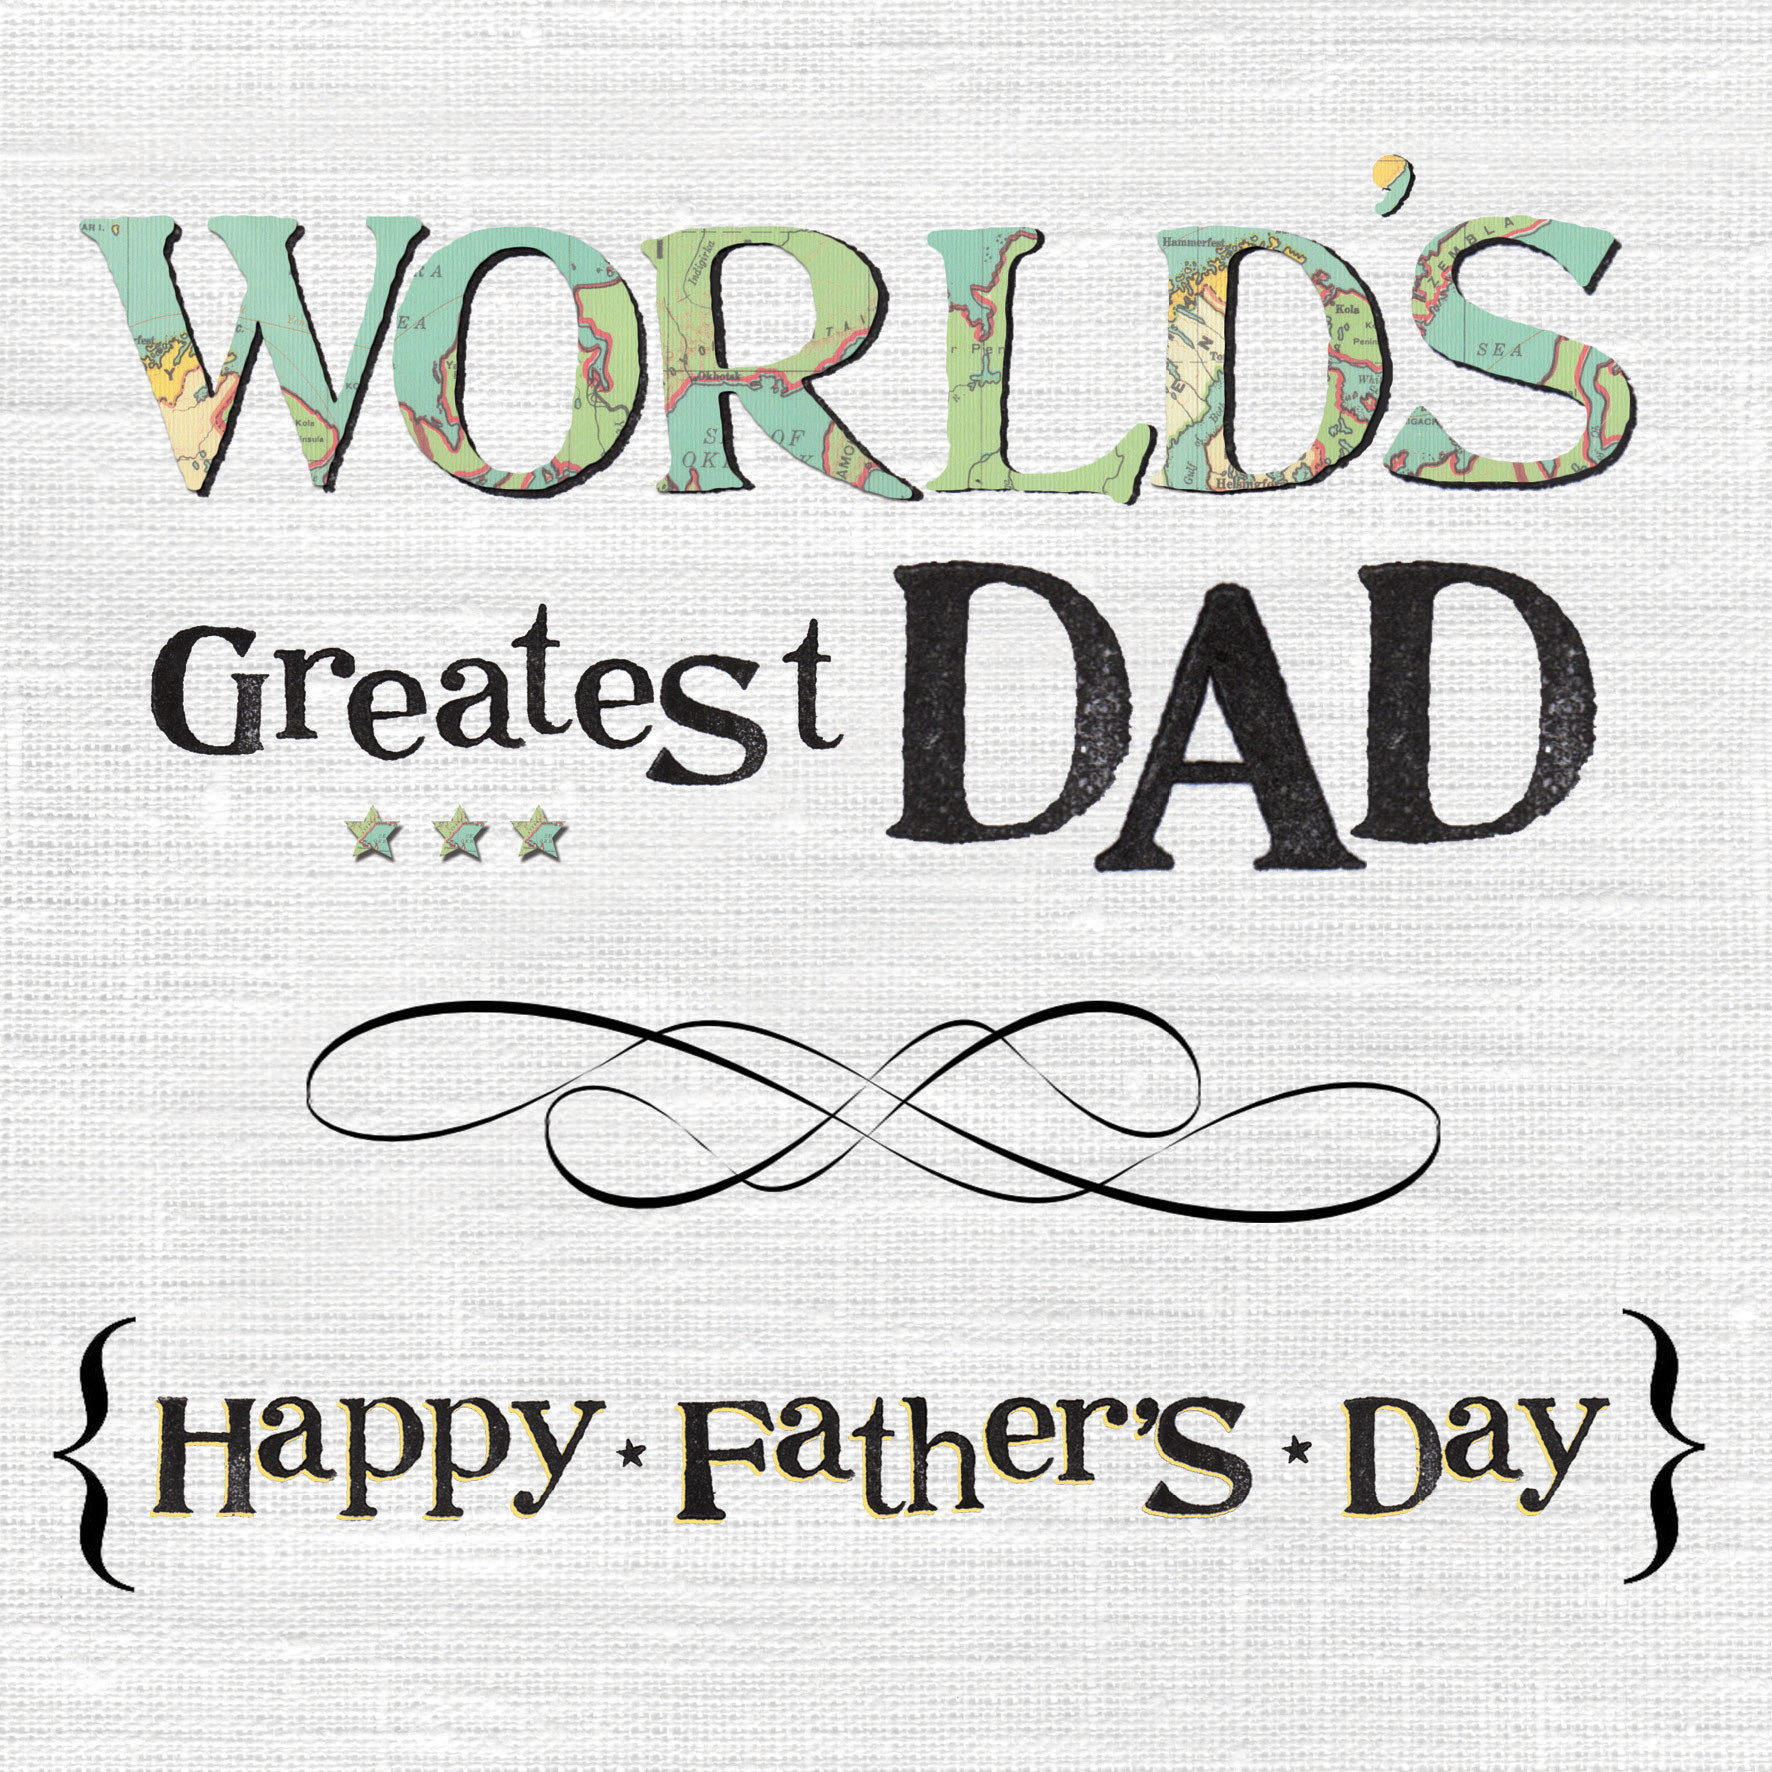 Fathers Day Pictures And Quotes
 Happy Fathers Day 2015 Wallpapers Quotes Wishes SMS